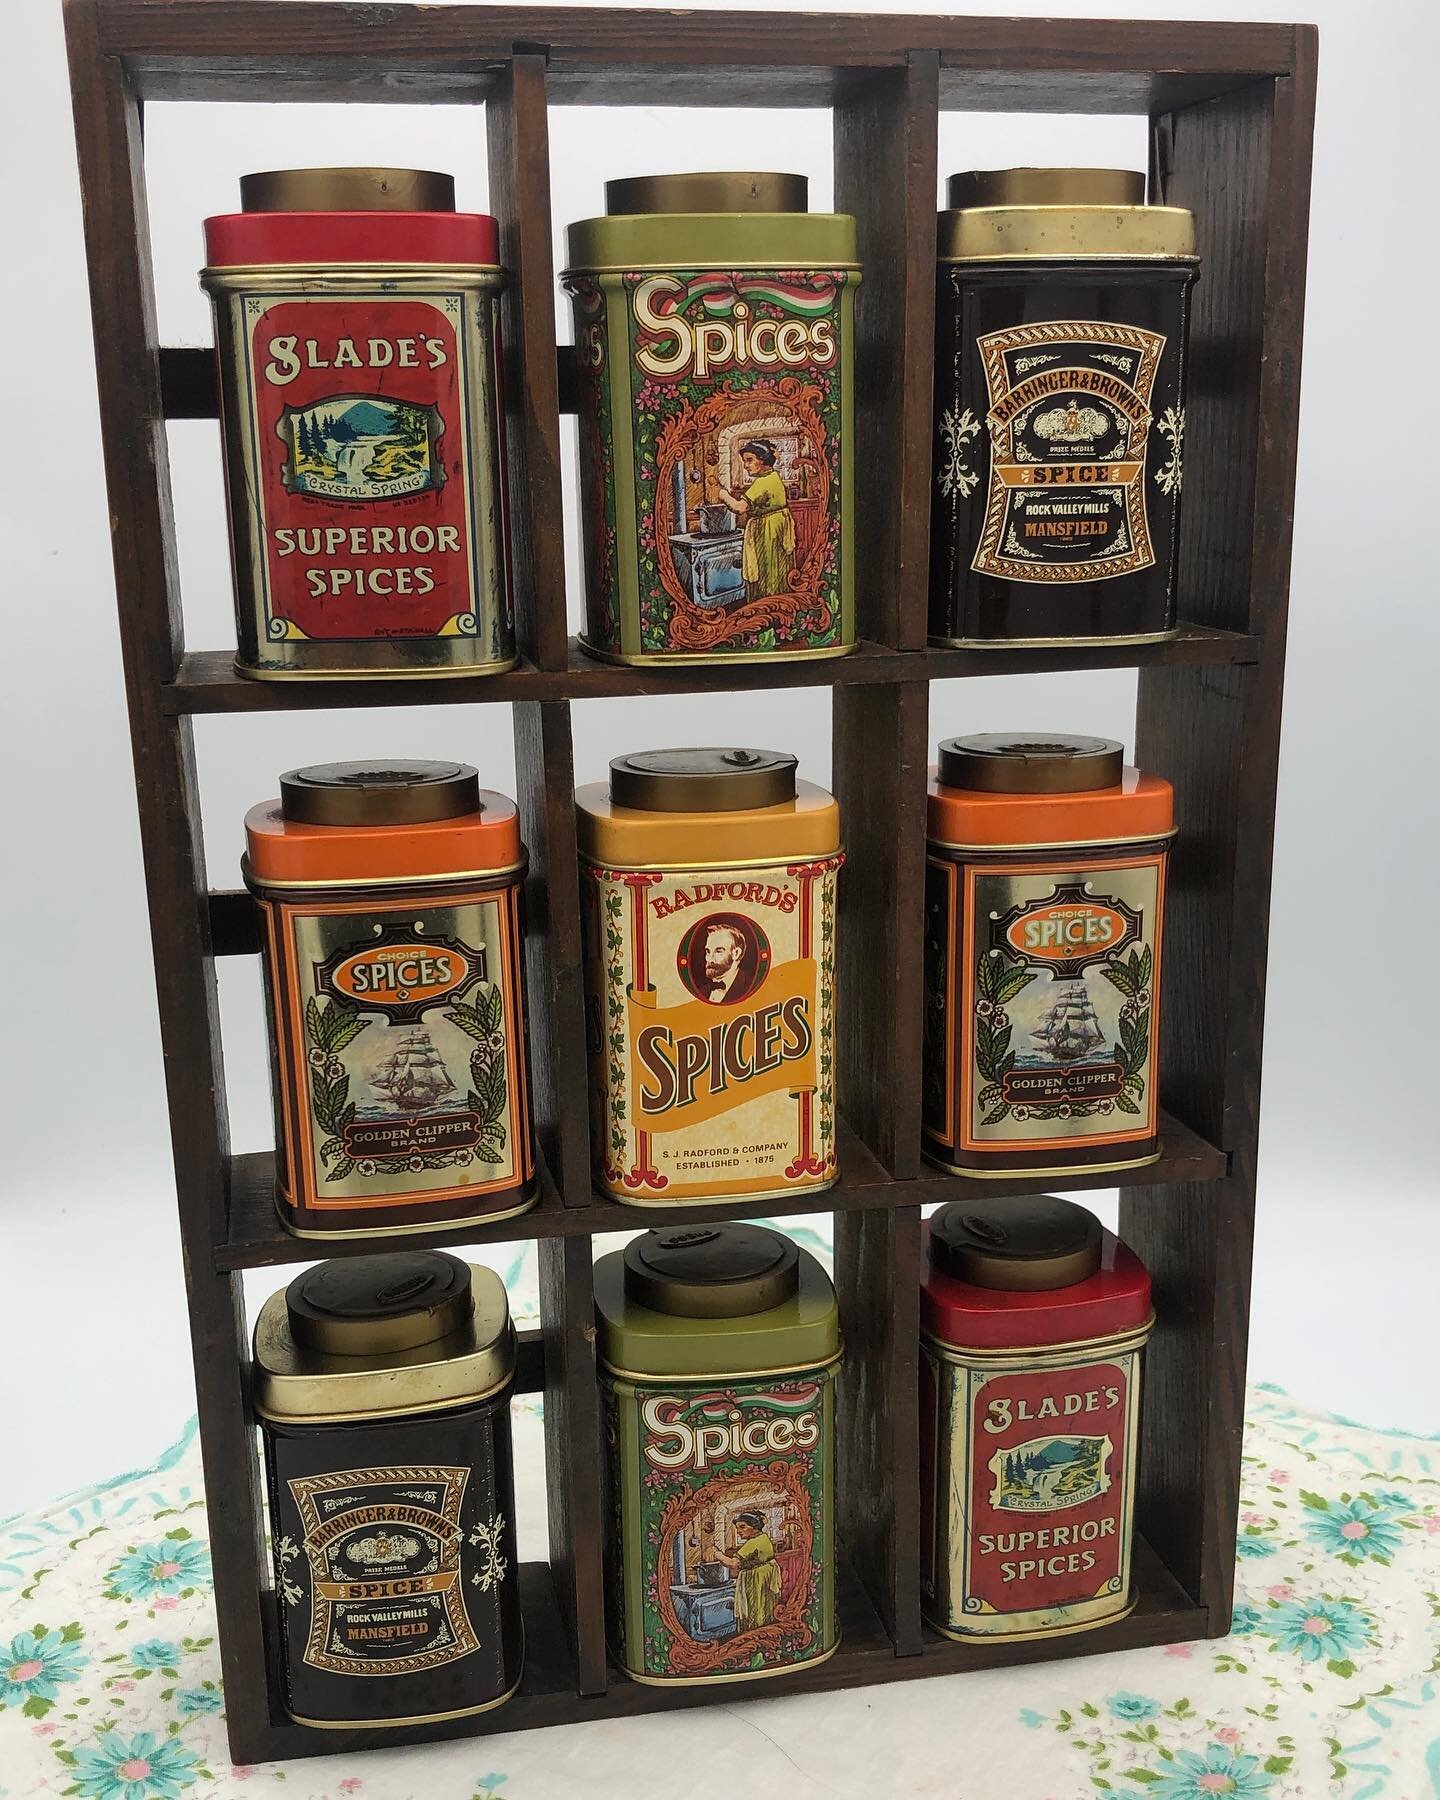 &ldquo;Spice up your life&rdquo;&hellip;Set of 9, with original rack. Made in England, these tins can be hung on the wall or free standing as a display. Gorgeous vibrant colors!  #spicerack #spiceracks #tins #englishtins #kitchentin #radfordsspices #